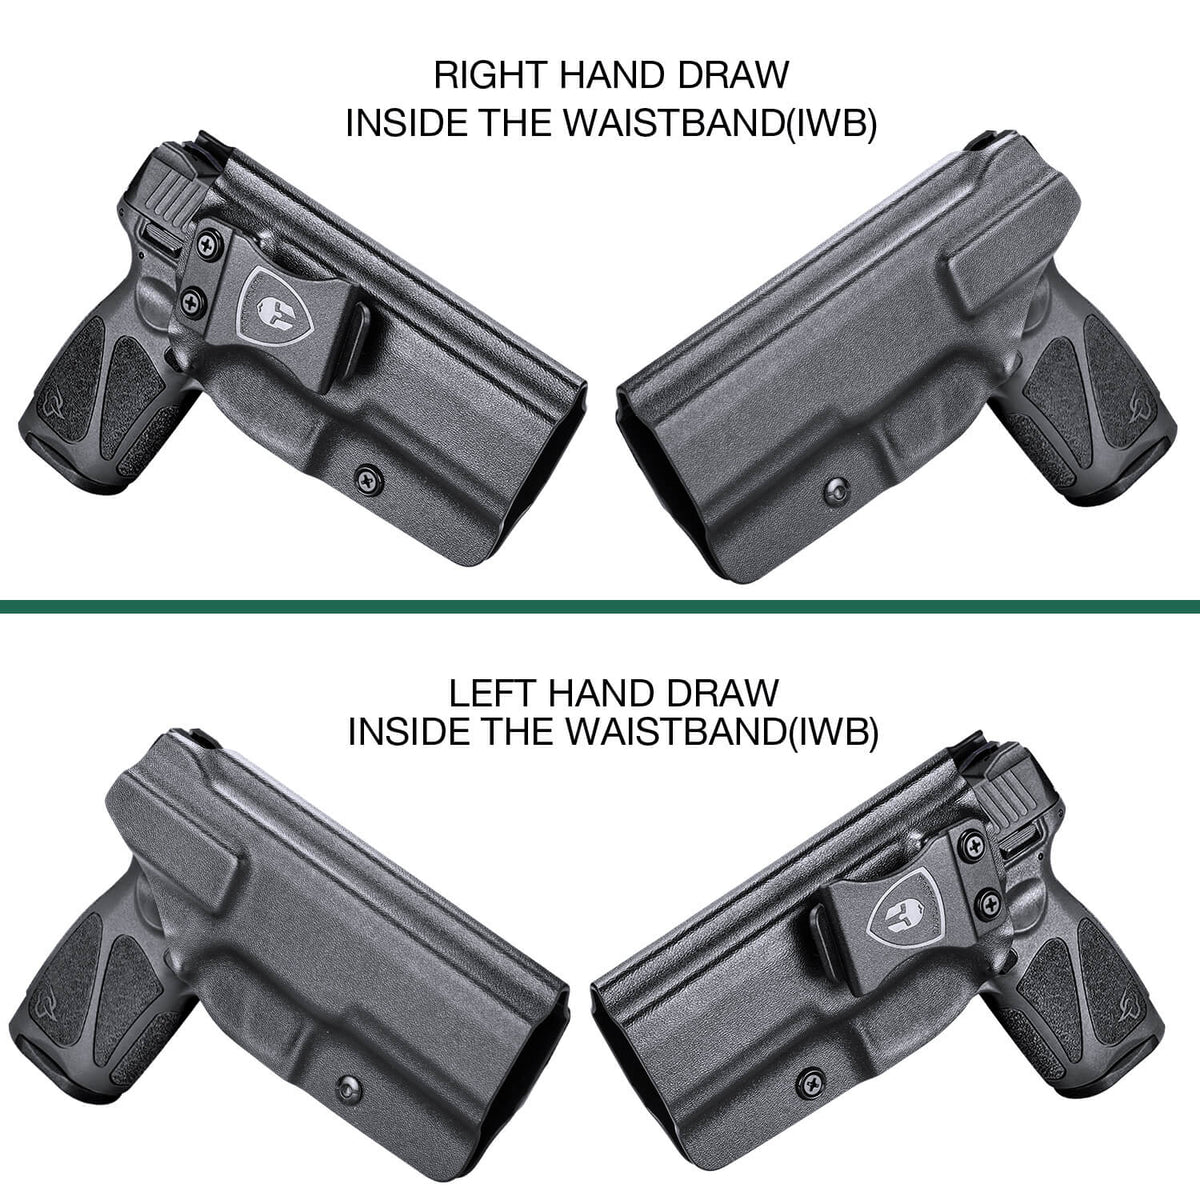 Taurus G3 IWB Kydex Holster Concealed Carry Right/ Left Handed | WARRIORLAND